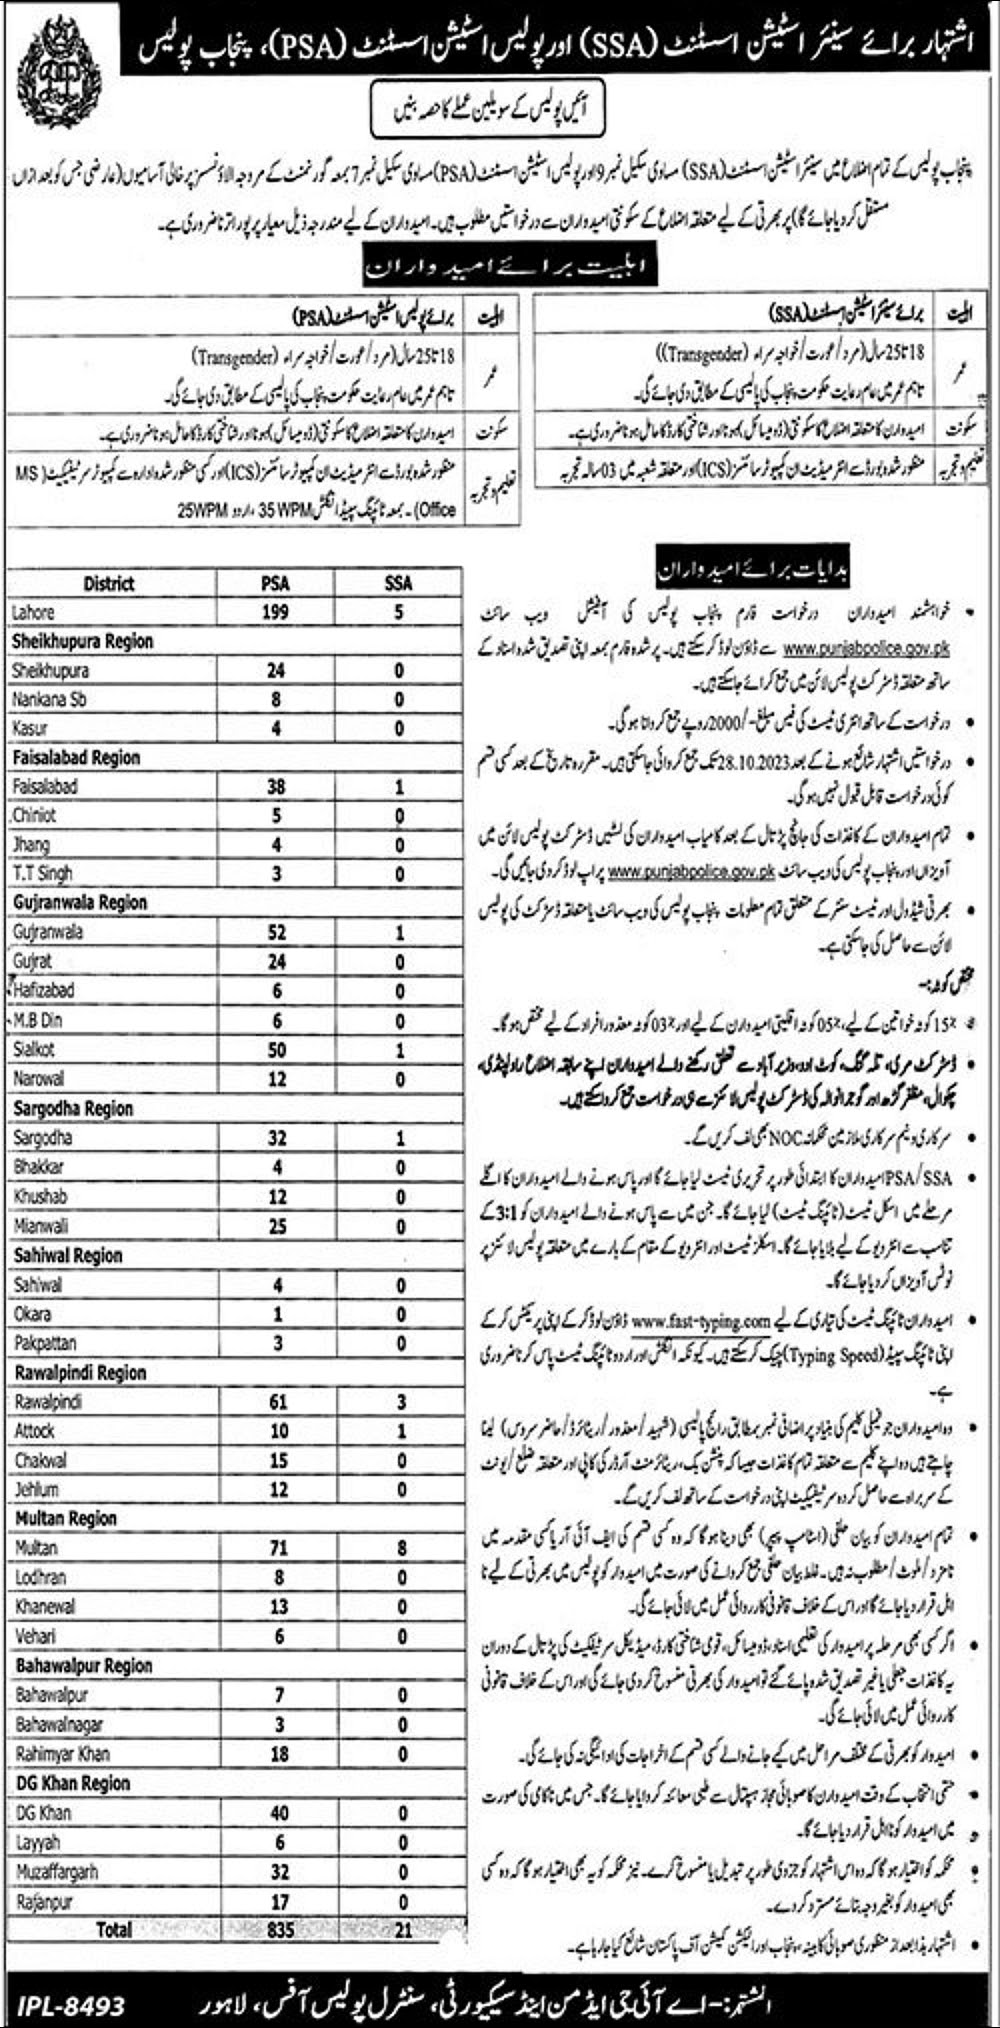 Latest Punjab Police Jobs for SSA and PSA 2023 - Application Form